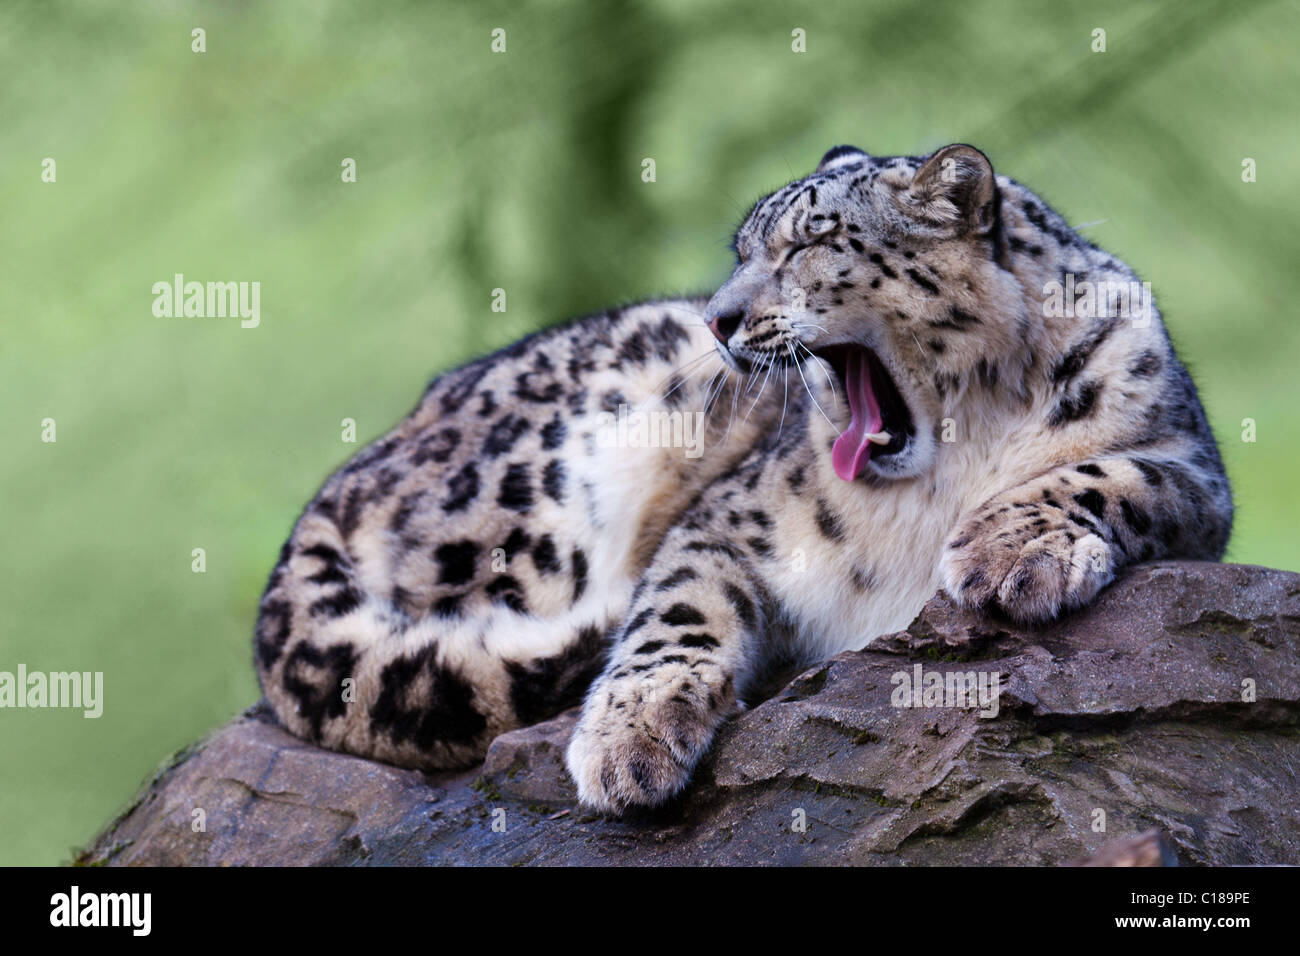 Snow leopard sat on a rock yawning Stock Photo